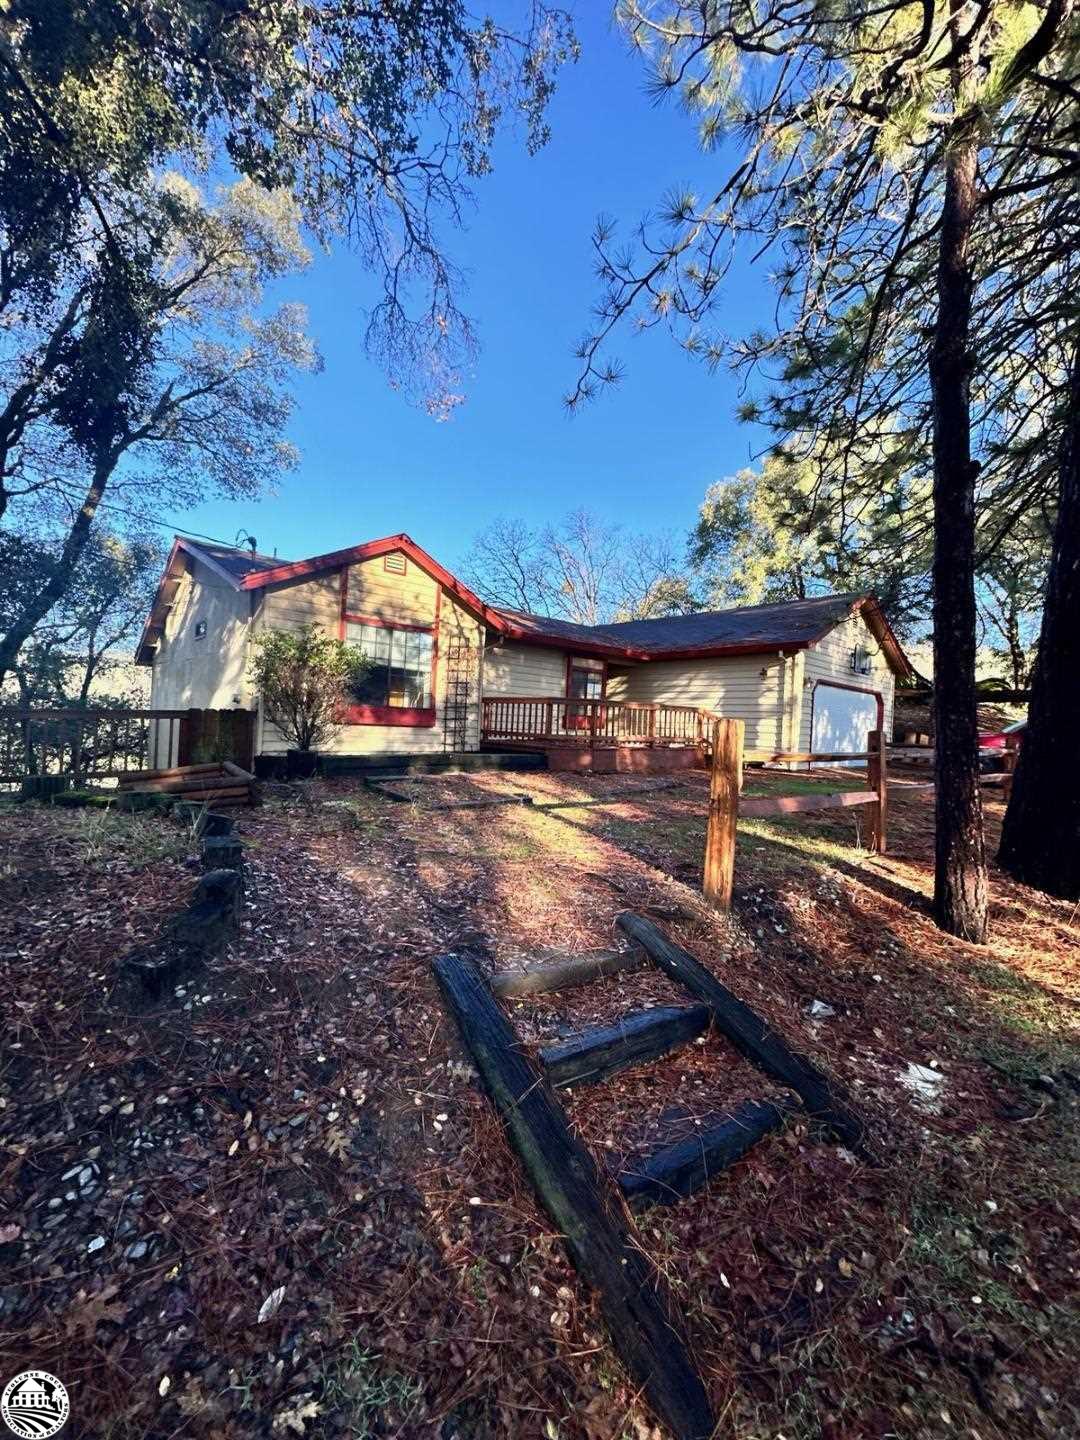 Photo of 22810 Meadow Ln in Sonora, CA